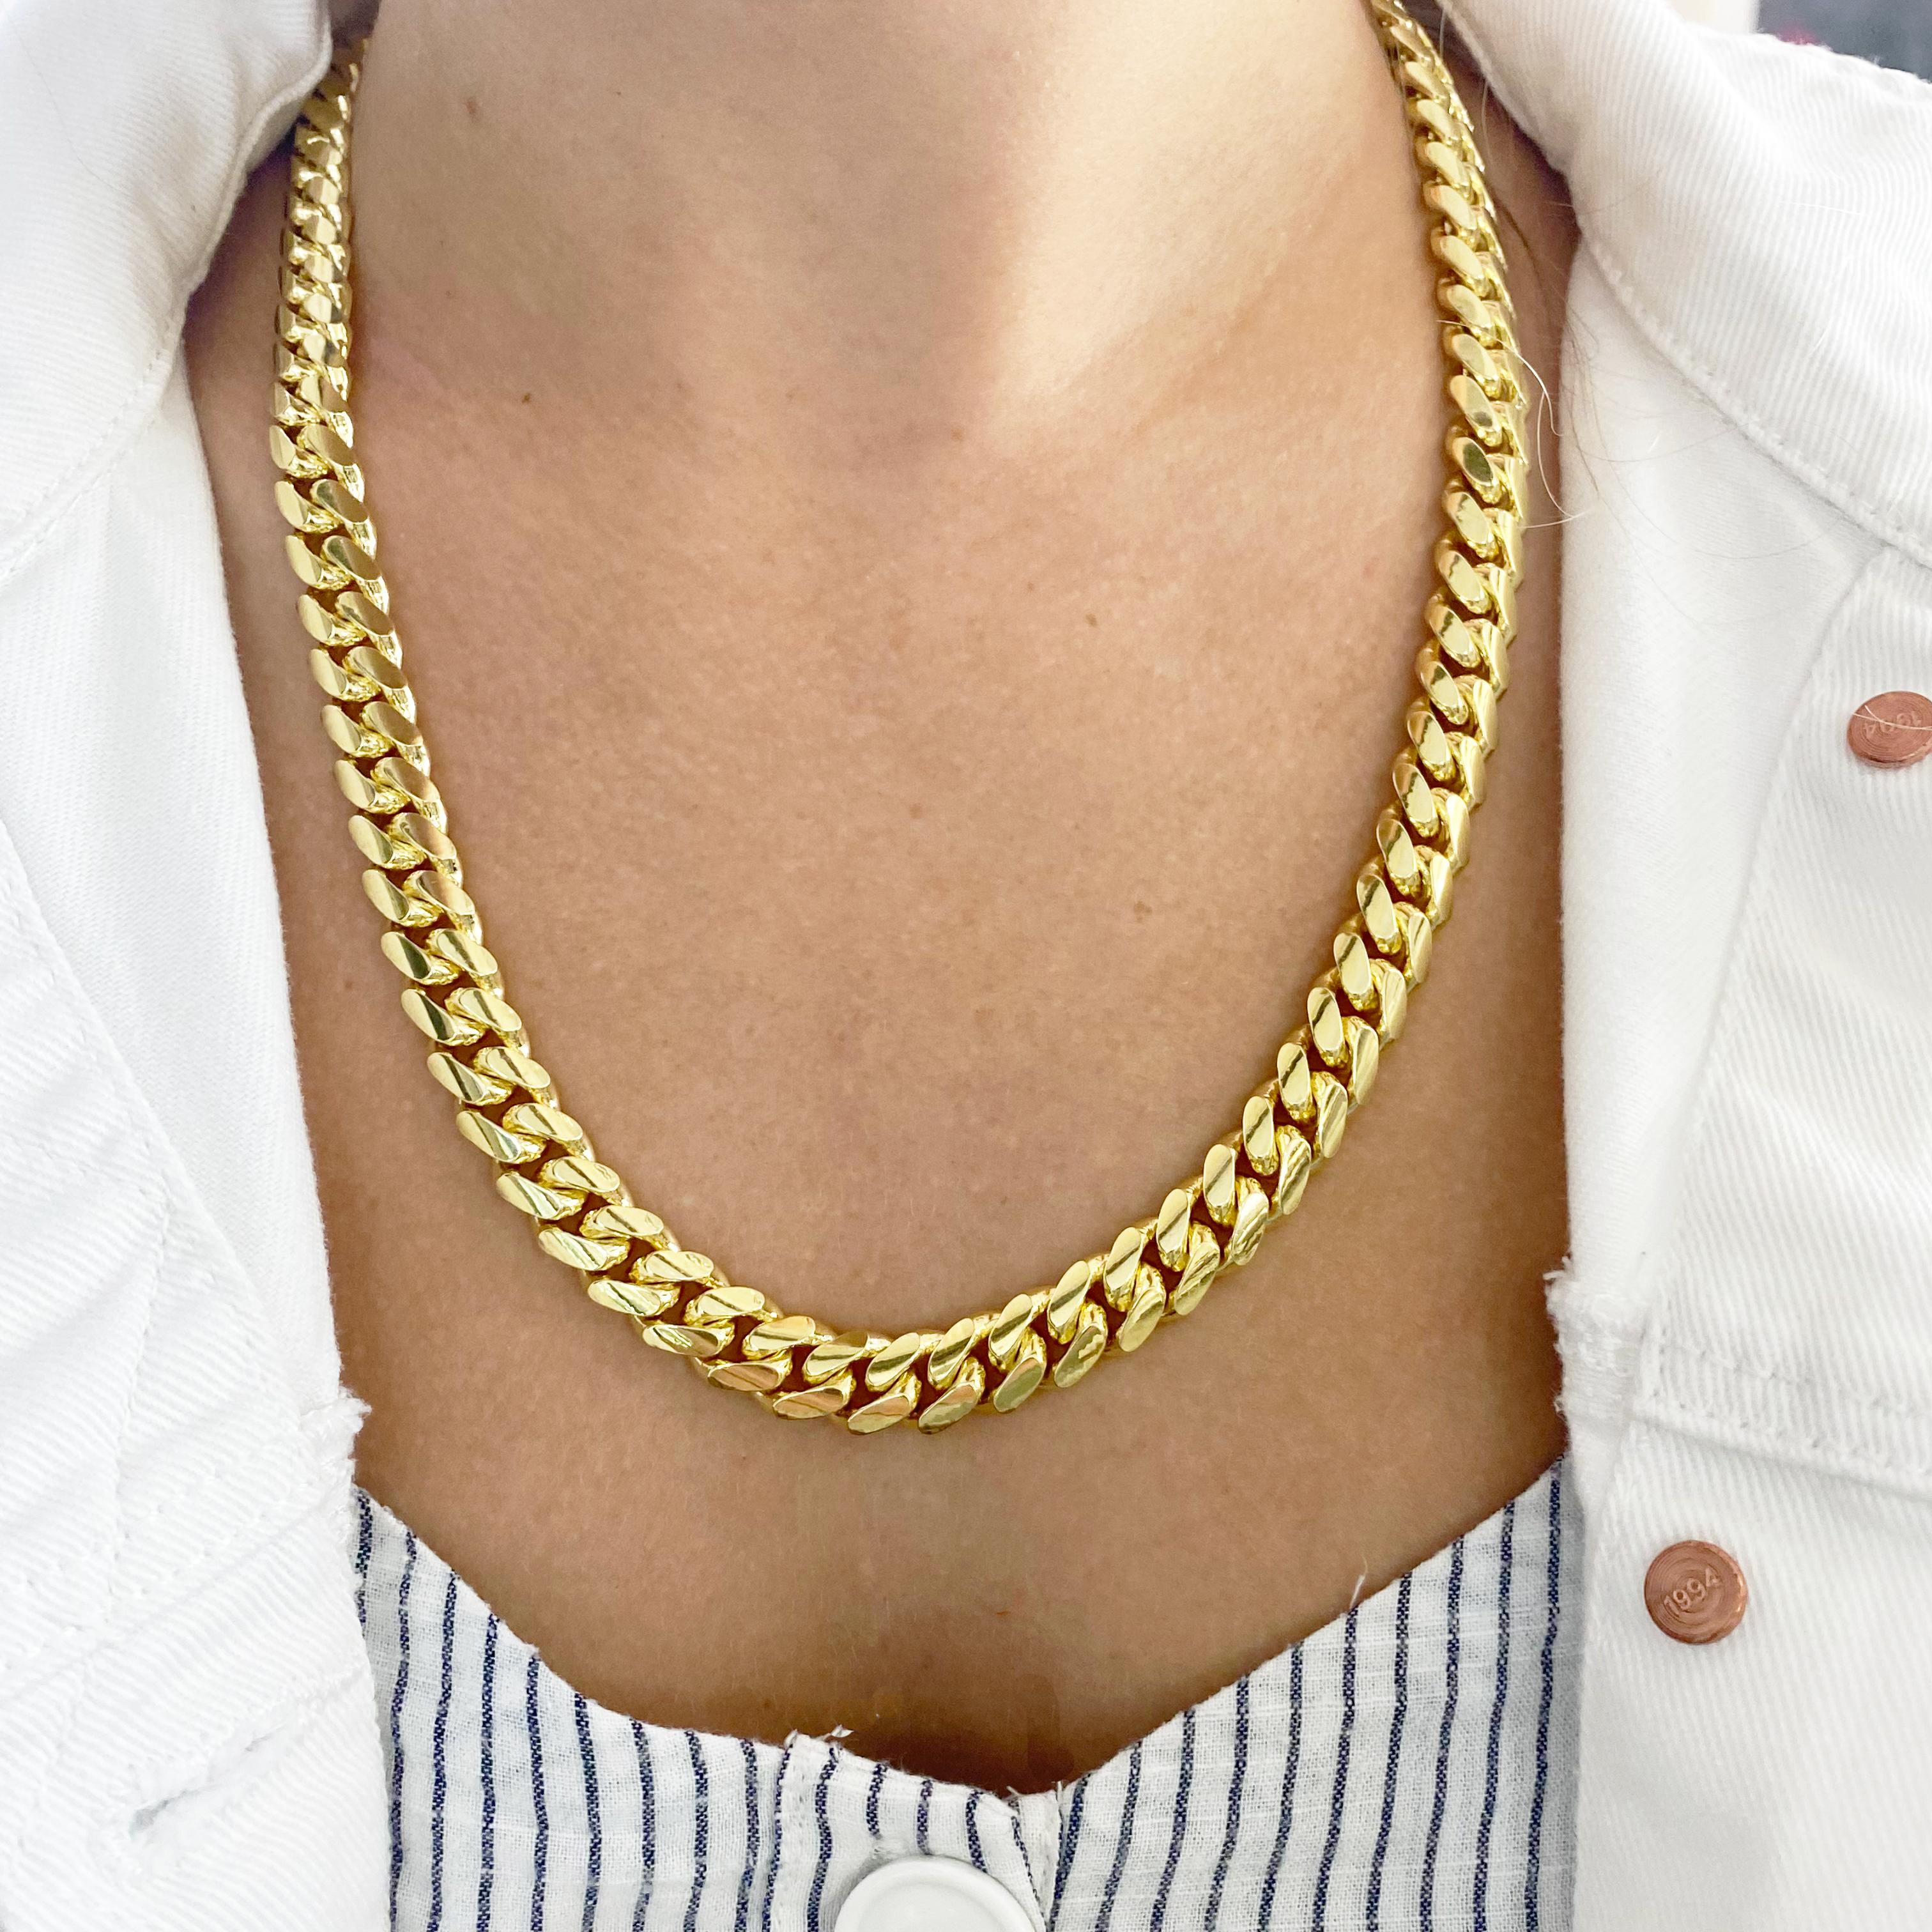 This XL Miami Cuban Chain is perfect for a bold statement. It is 10 millimeters wide and weighs 185.5 grams and extremely heavy and solid 14 karat yellow gold. It has an amazing hidden box clasp with a safety chain. Look like a professional with